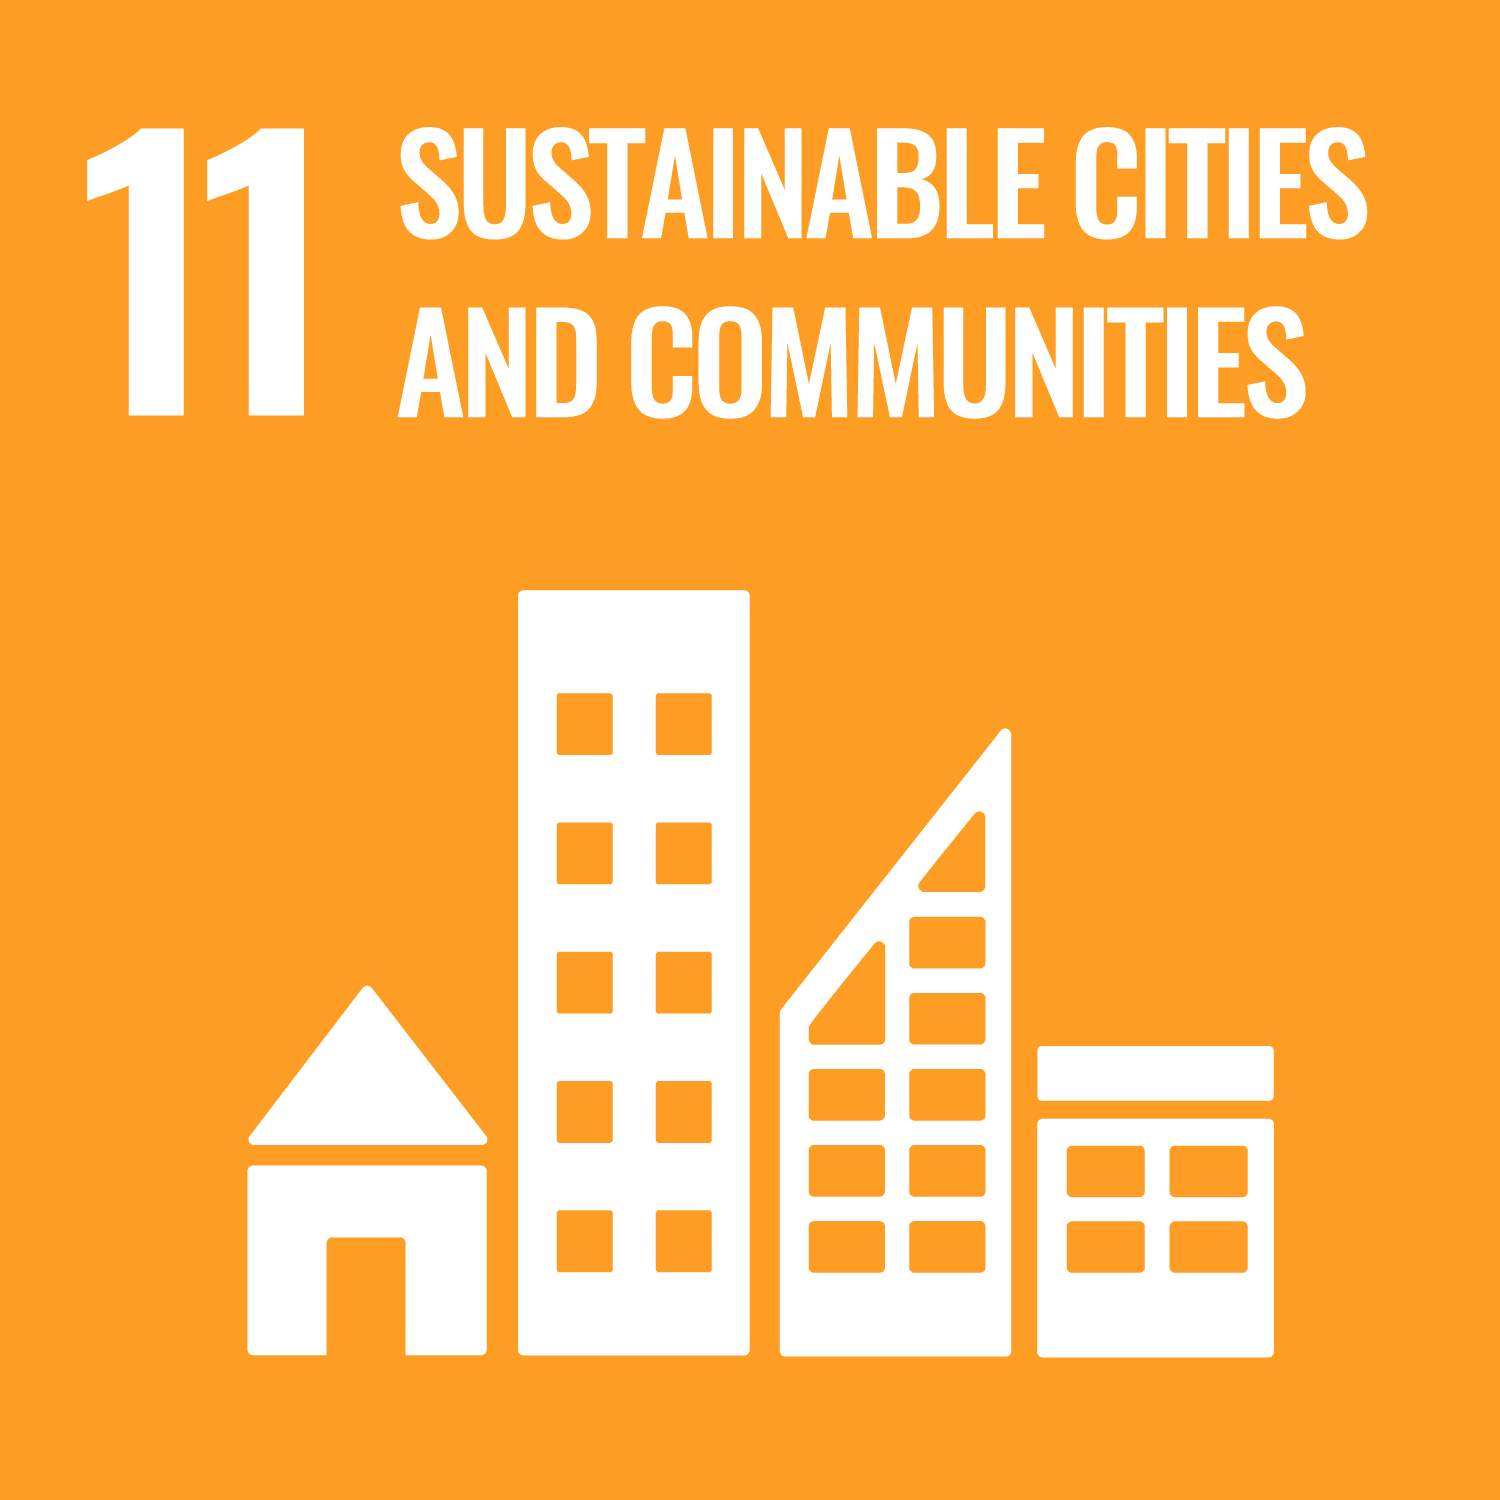 Graphic image of four different sized buildings with text saying '11 sustainable cities and communities' reflecting Sustainable Development Goal (SDG) or Global Goal 11